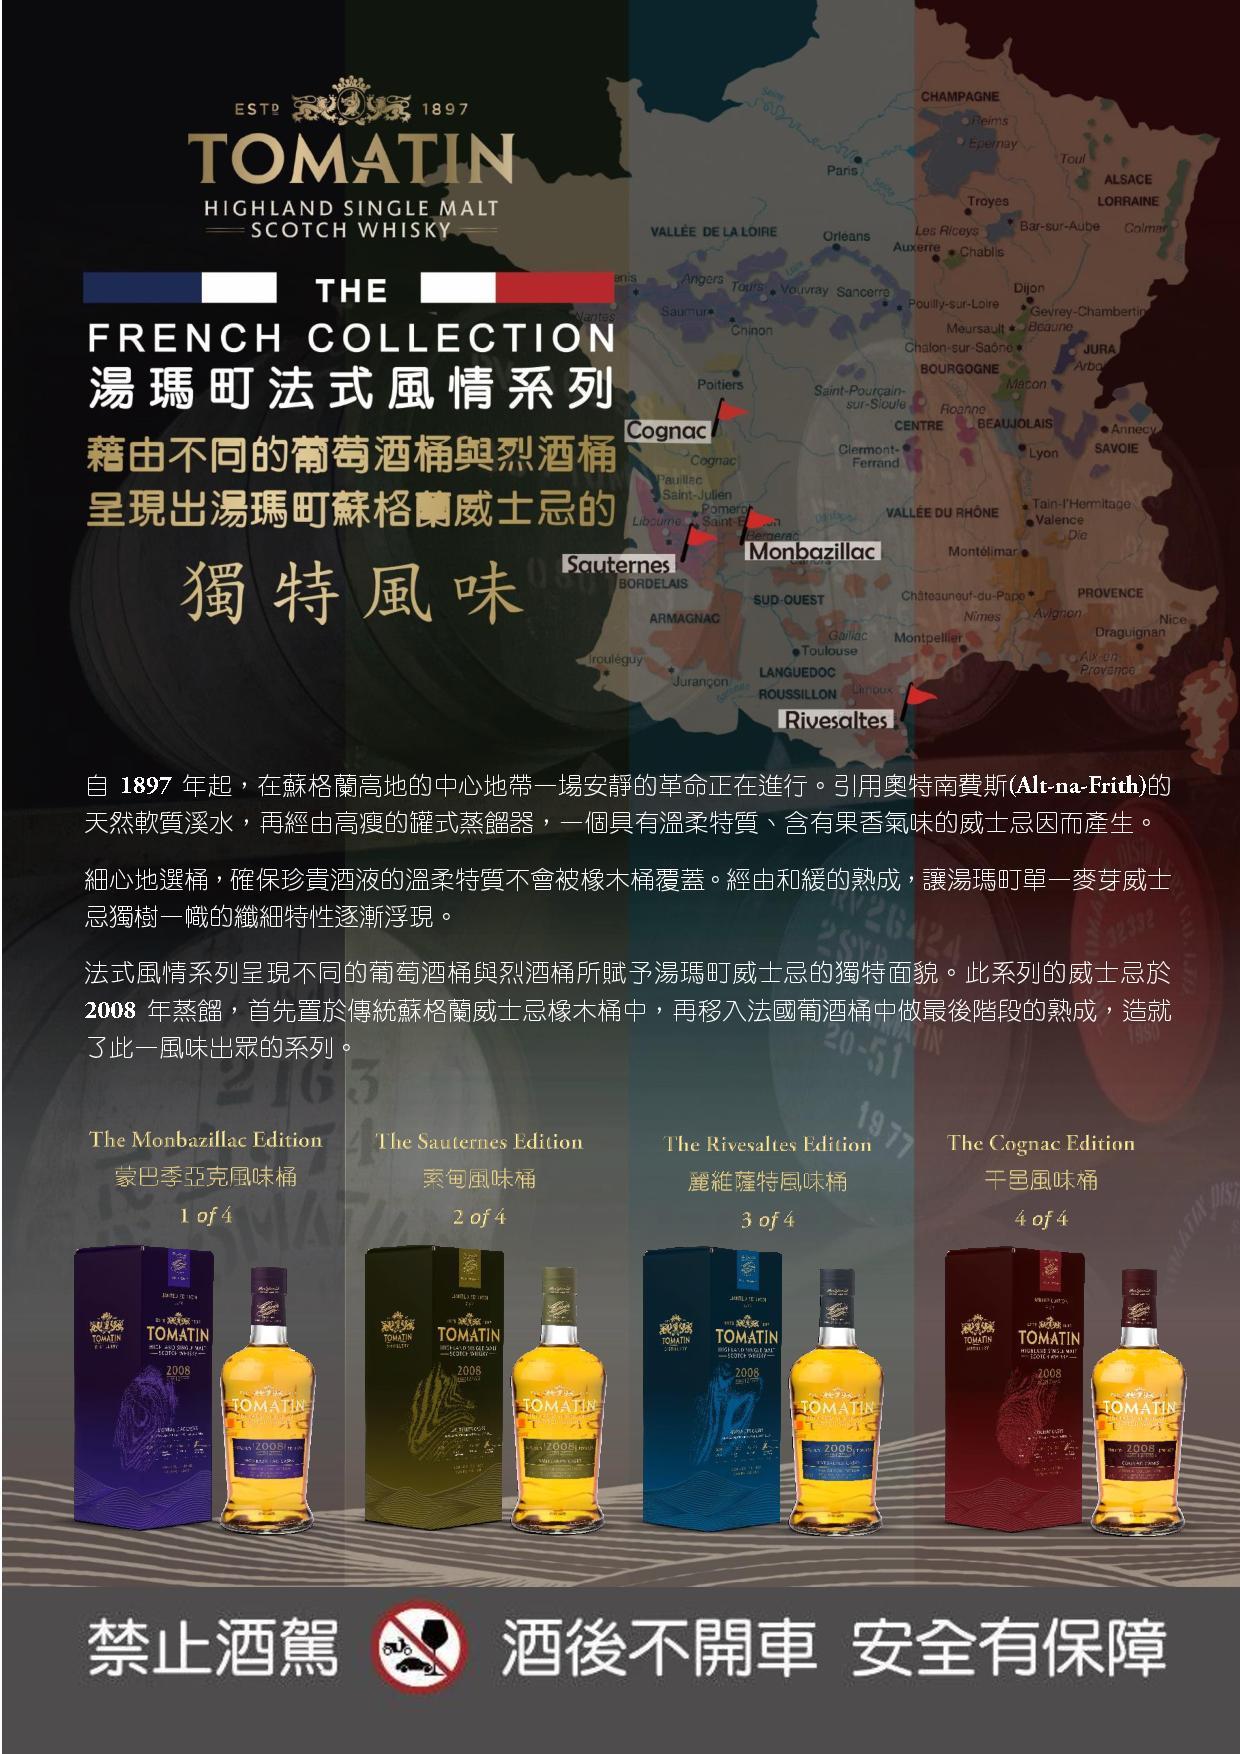 TOMATIN FRENCH COLLECTION 湯瑪町法式風情